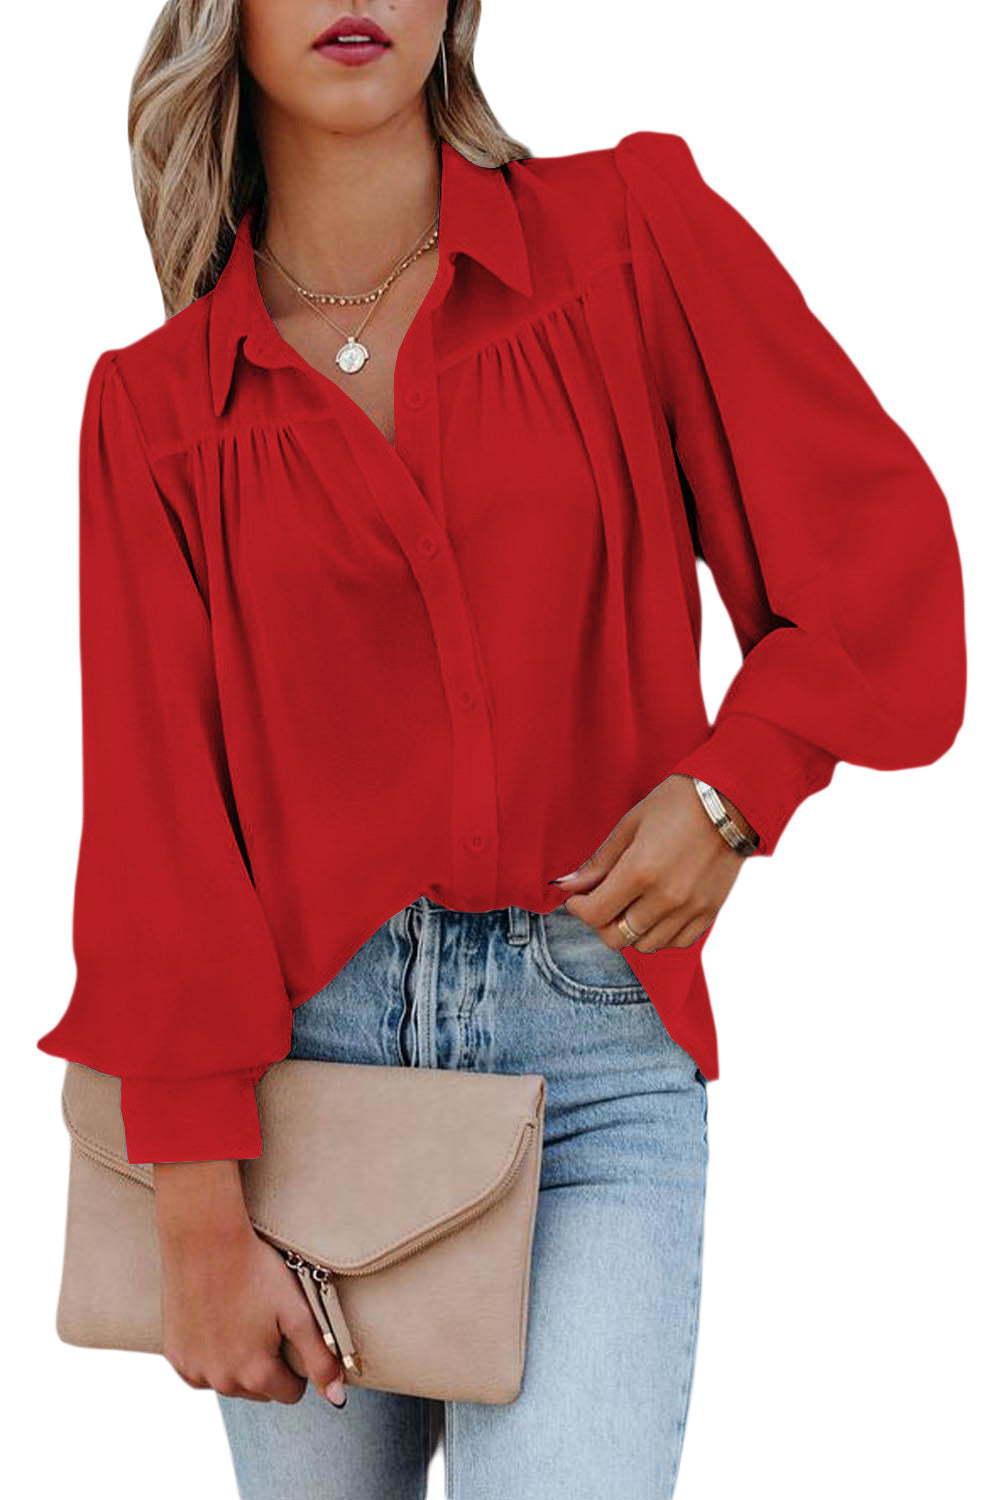 LC2552187-3-S, LC2552187-3-M, LC2552187-3-L, LC2552187-3-XL, LC2552187-3-2XL, Red Solid Color Button Up Puff Sleeve Blouse